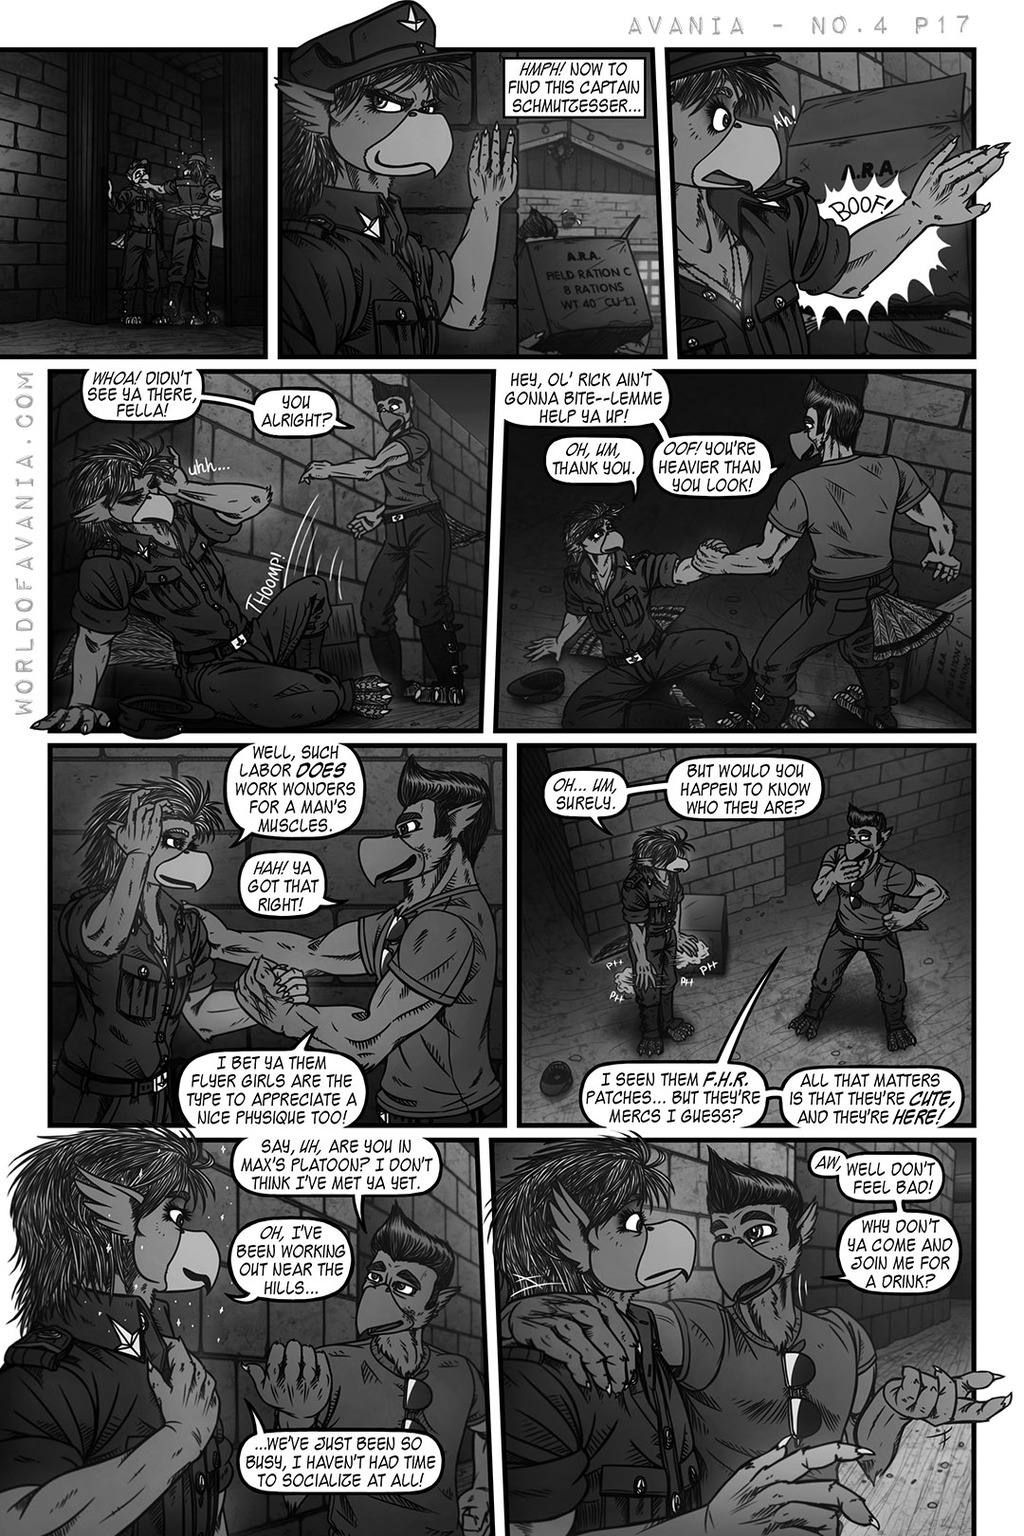 Avania Comic - Issue No.4, Page 17